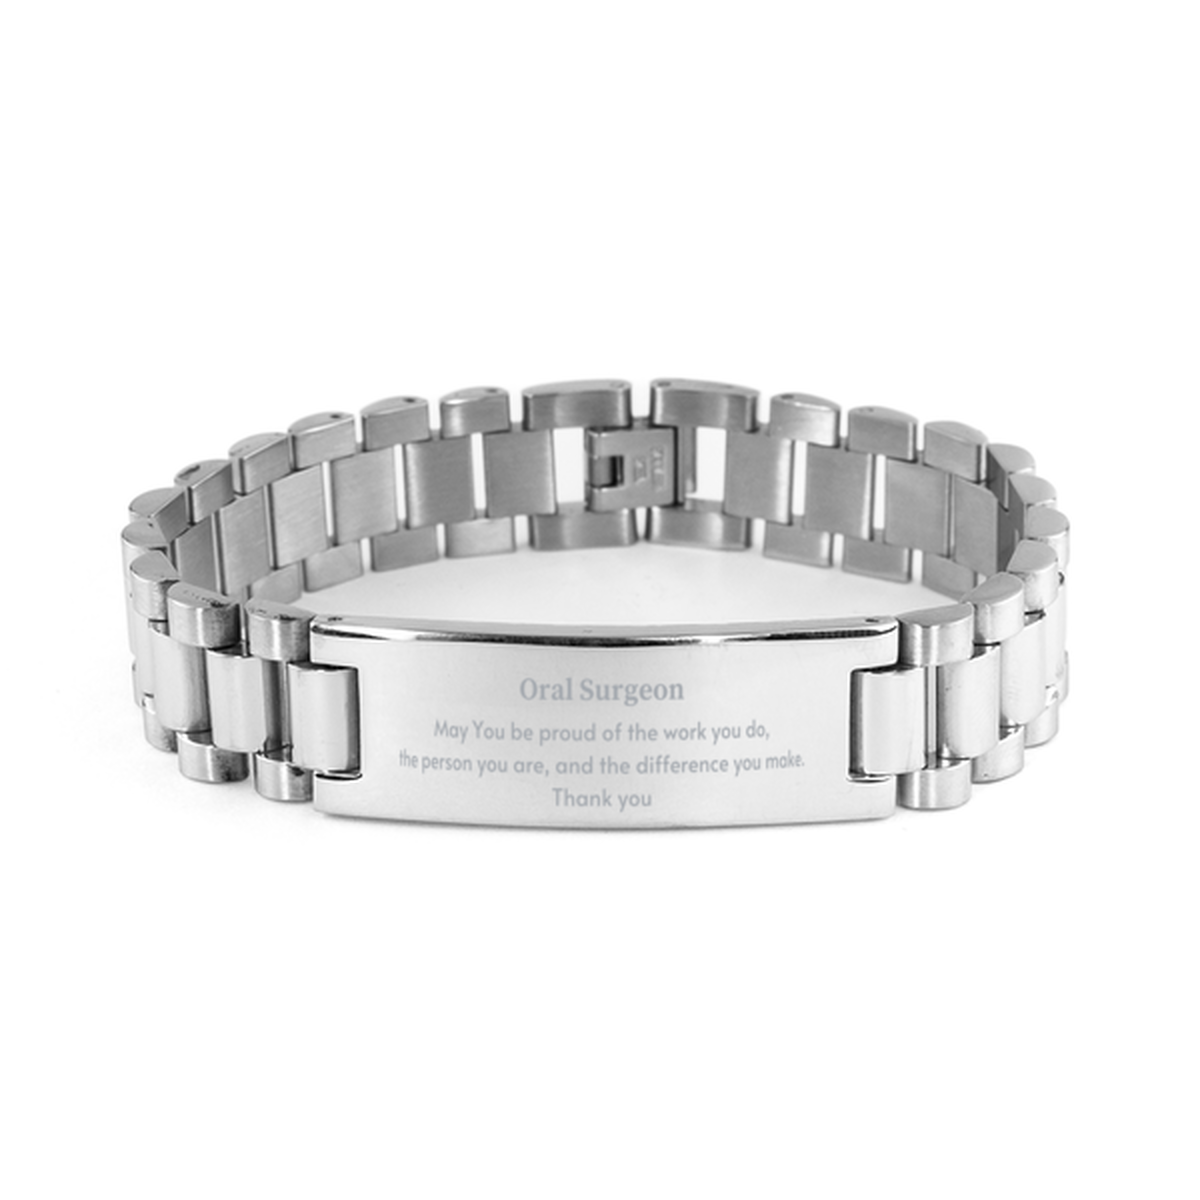 Heartwarming Ladder Stainless Steel Bracelet Retirement Coworkers Gifts for Oral Surgeon, Oral Surgeon May You be proud of the work you do, the person you are Gifts for Boss Men Women Friends